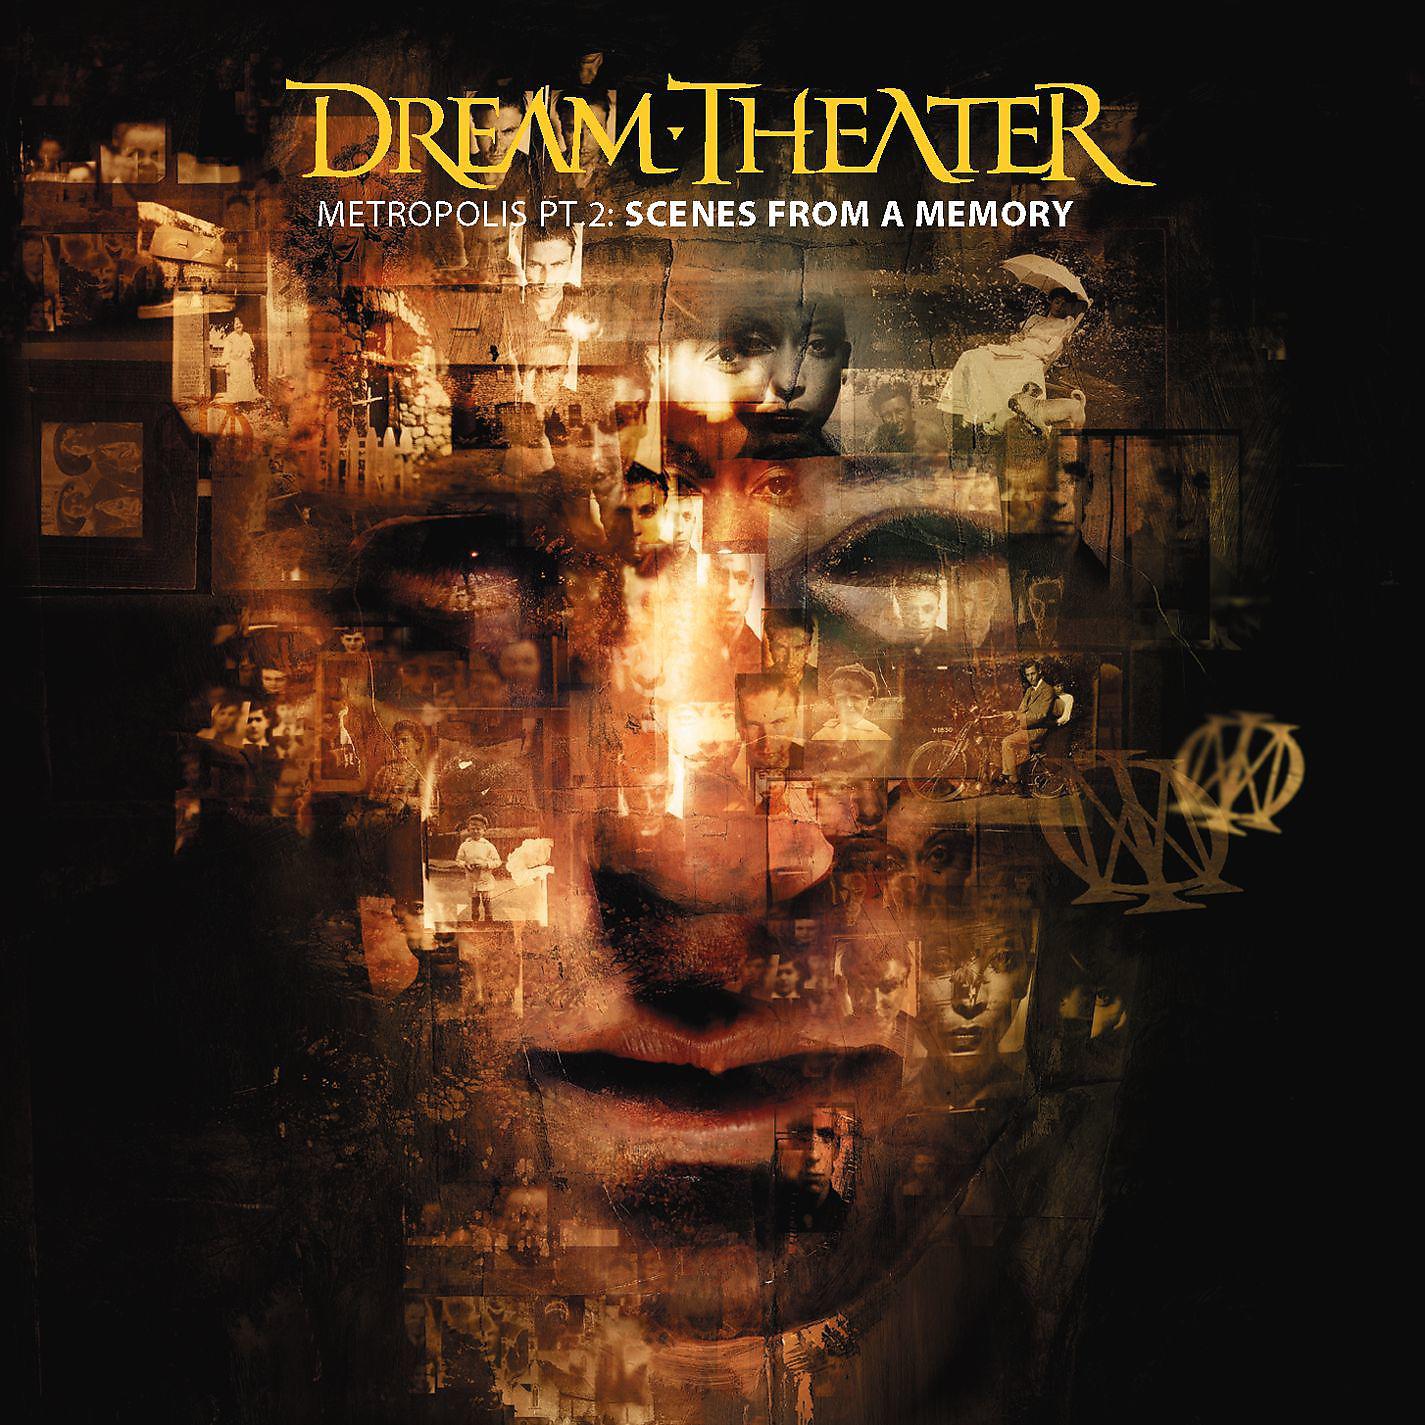 Dream Theater - 1999 ''Metropolis, pt. 2: Scenes from a Memory''. Dream Theater Metropolis pt. 2 Scenes from a Memory. Dream Theater Scenes from a Memory 1999. 1999 - Metropolis pt. 2 Scenes from a Memory.